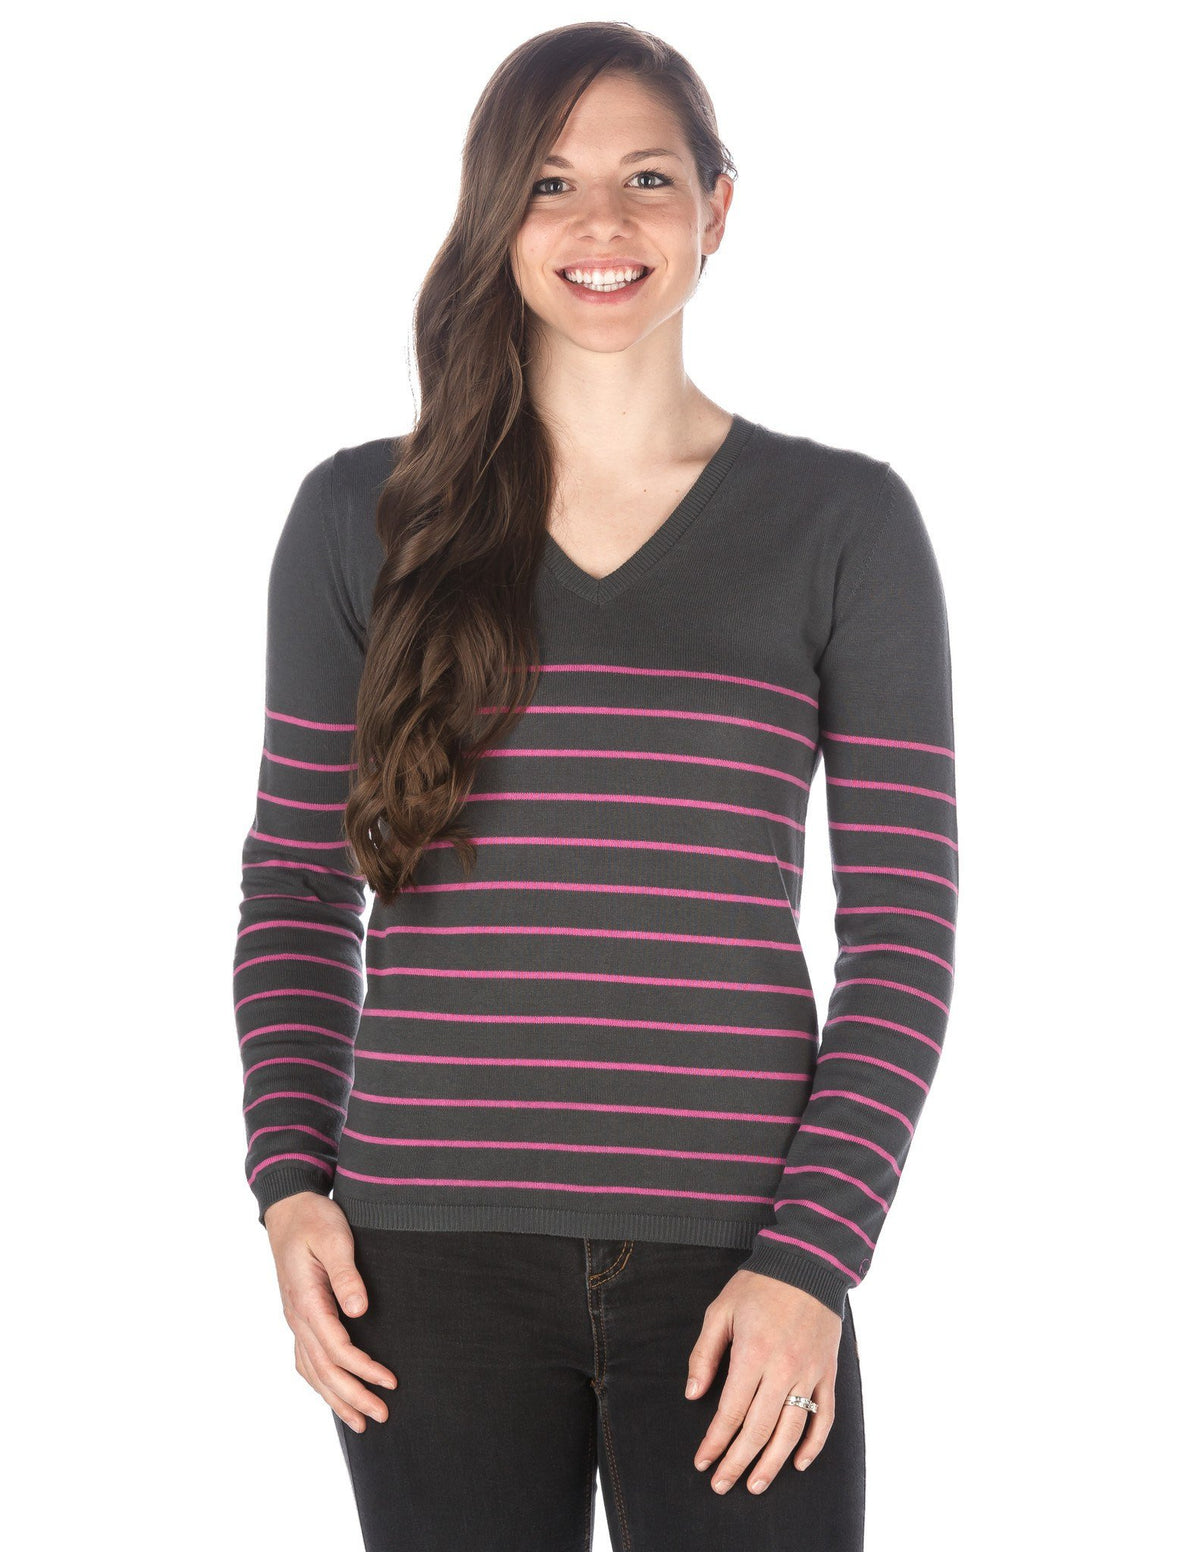 Women's 100% Cotton V-Neck Essential Sweater - Stripes Gray-Pink